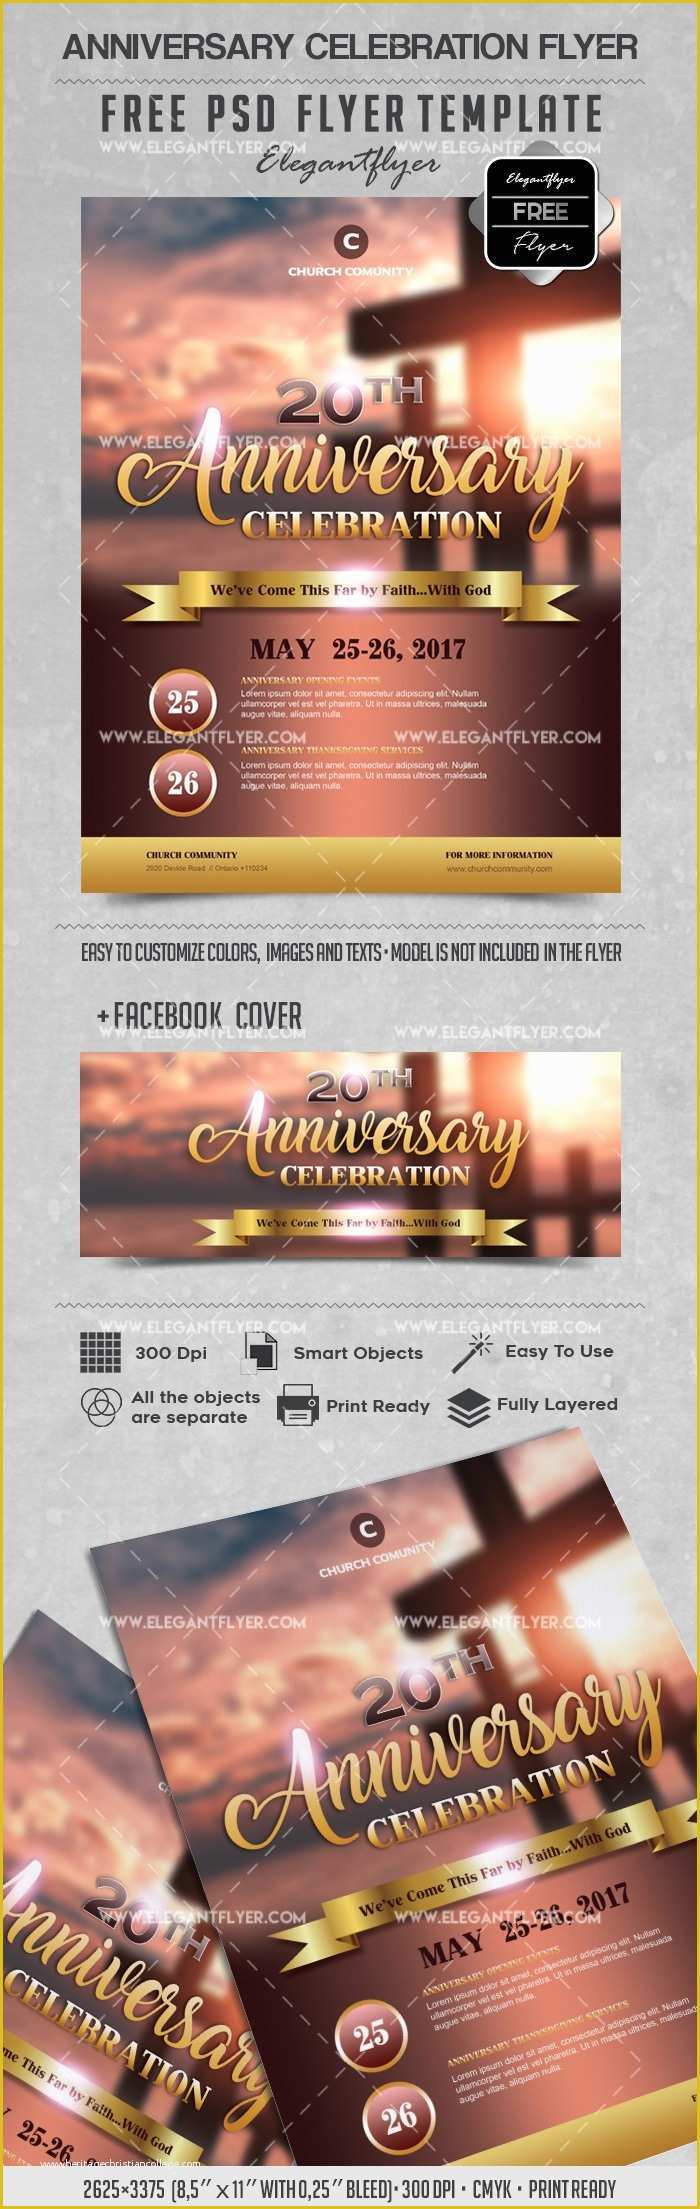 Celebration Flyer Template Free Of Anniversary Celebration – Free Psd Flyers Template – by